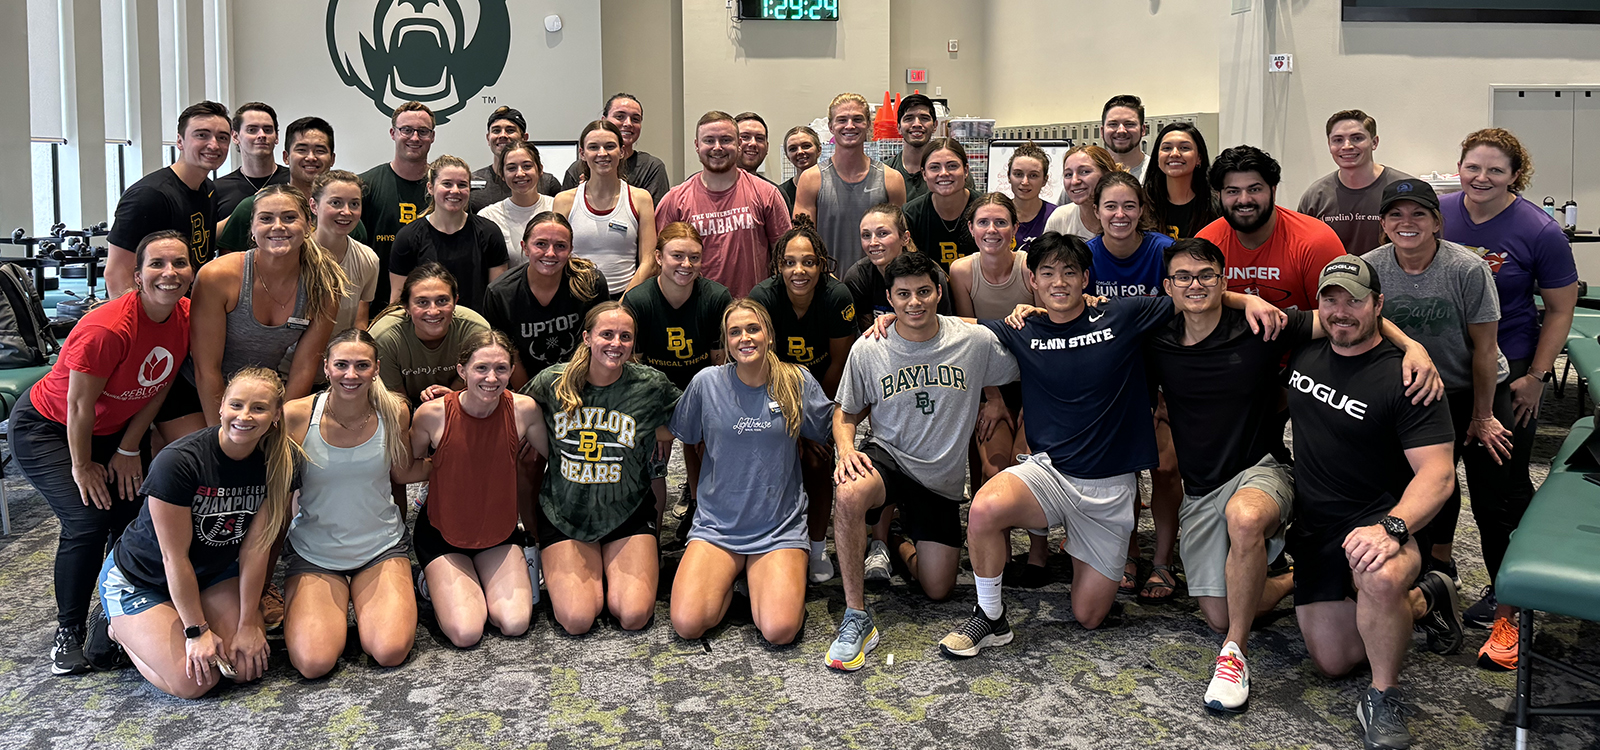 Baylor Doctor of Physical Therapy Inside Group Photo